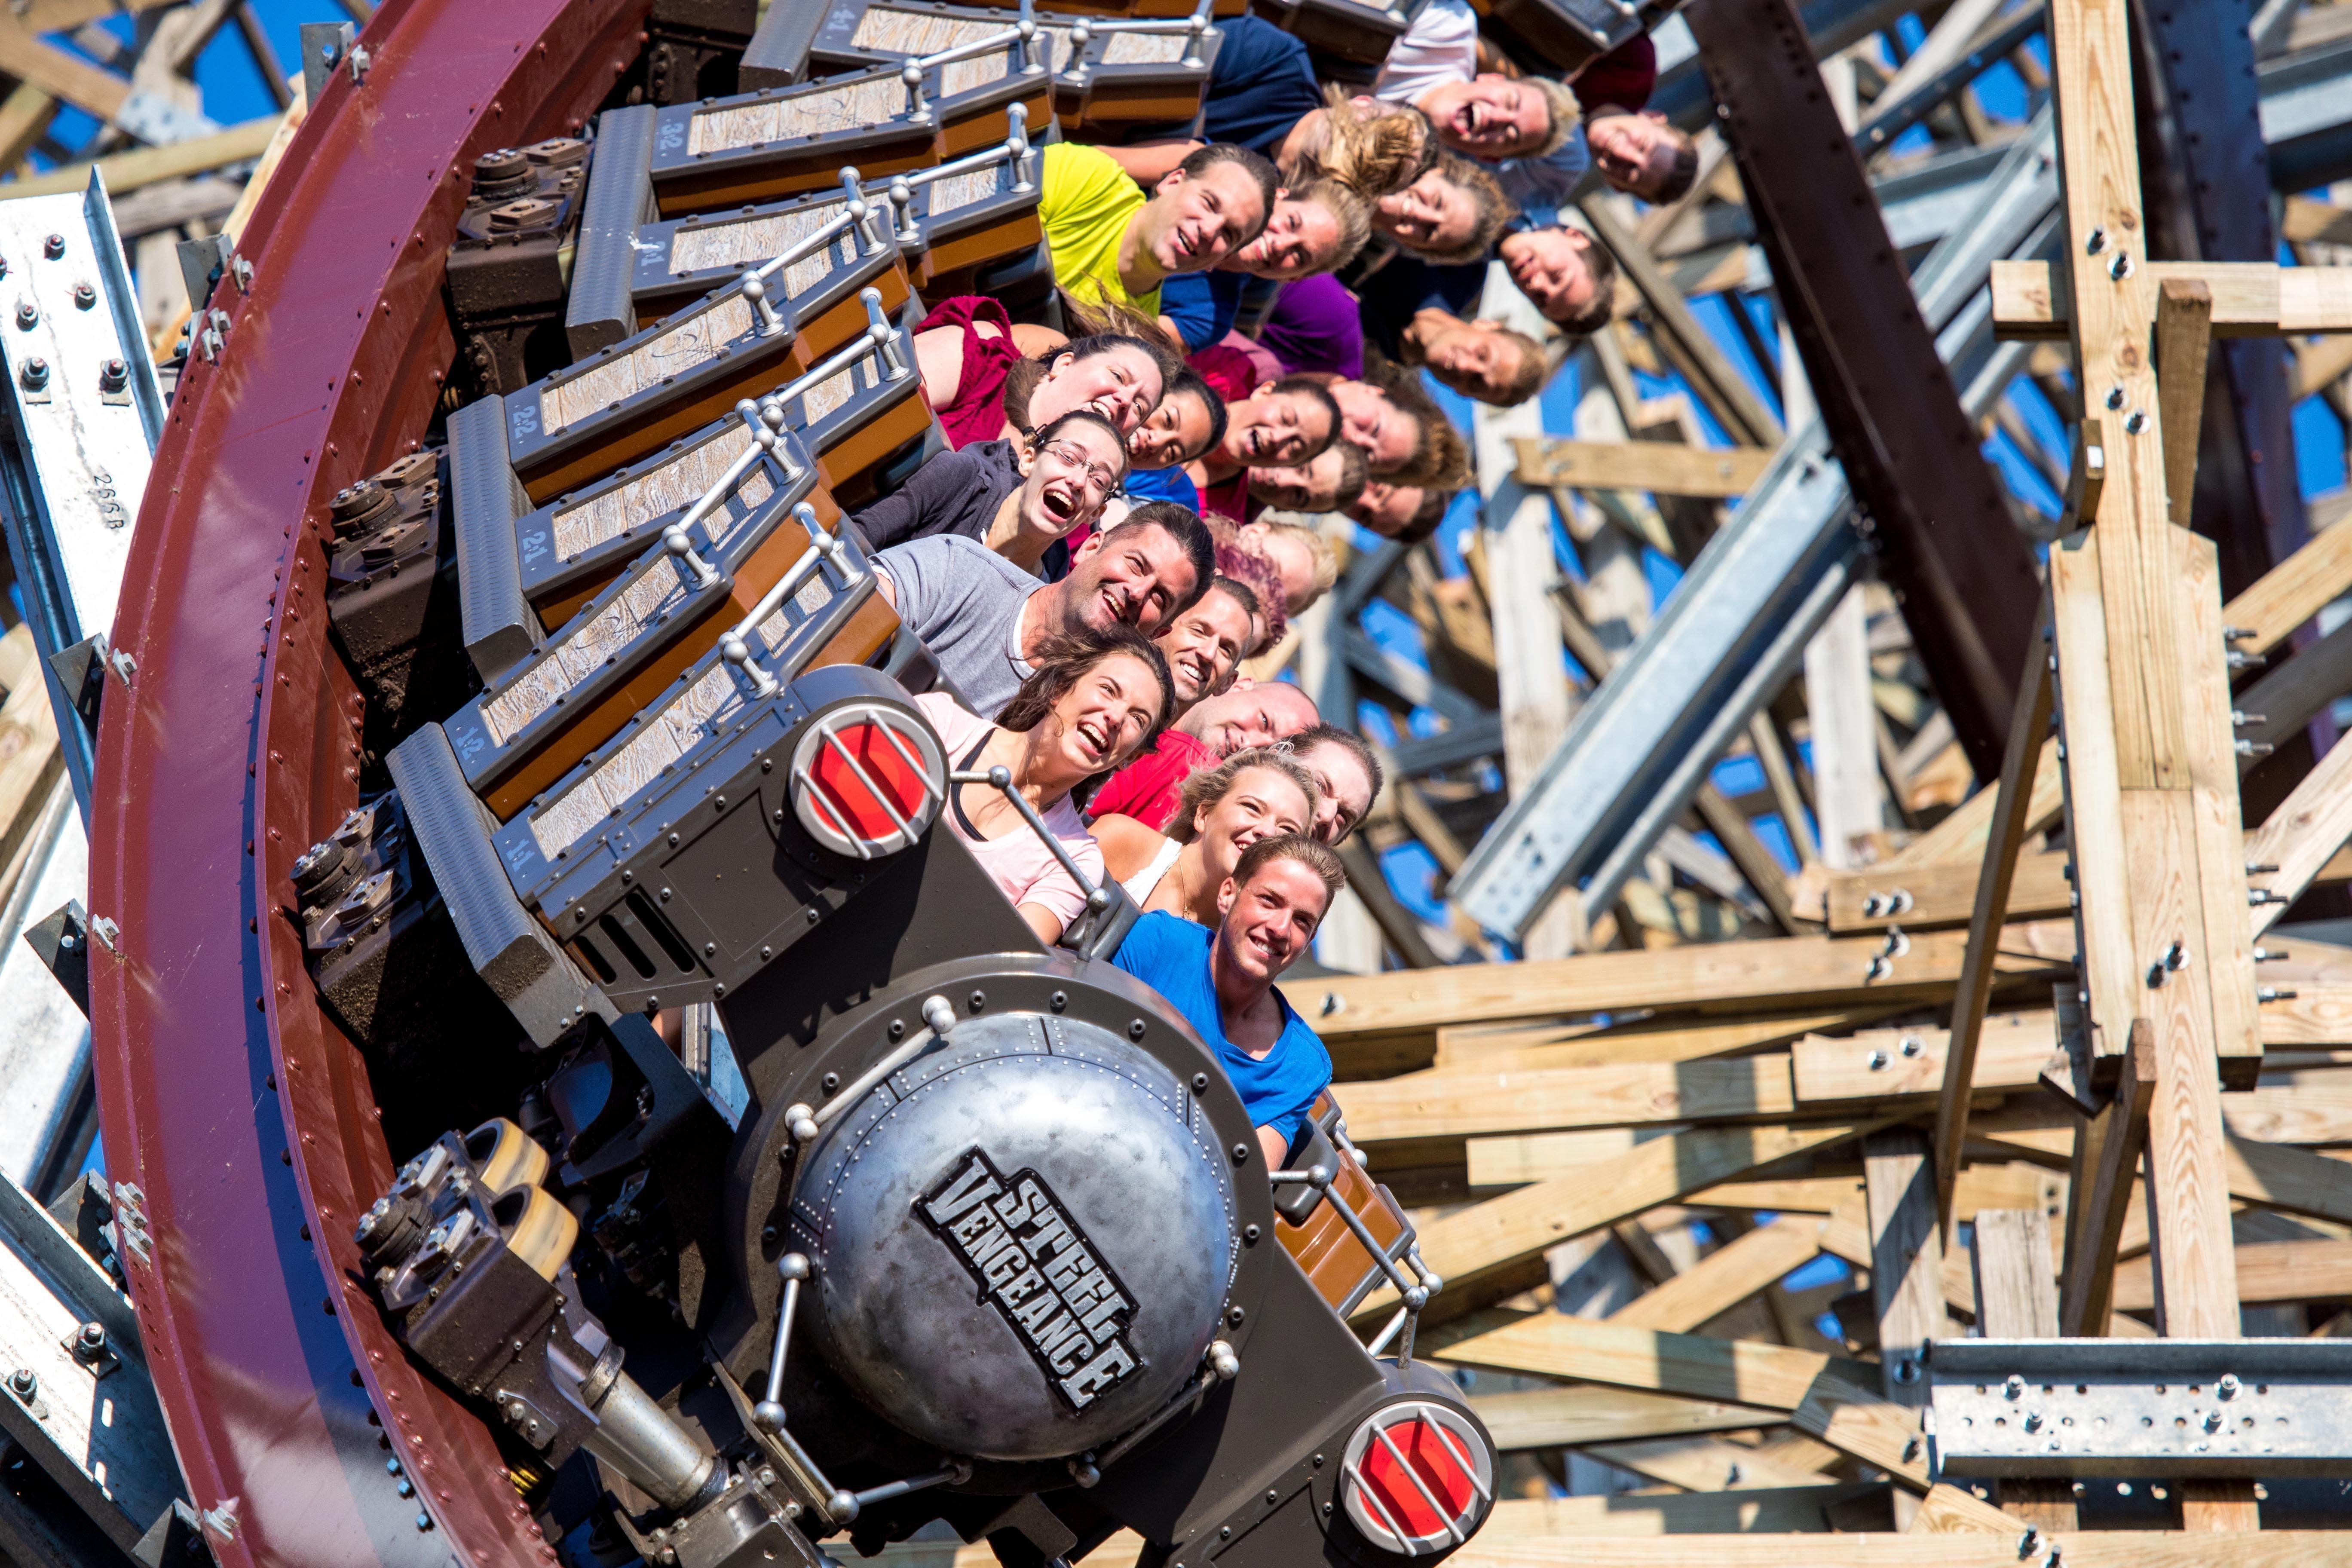 USA Today's Top 10 list of best amusement parks includes 2 in driving distance of Akron